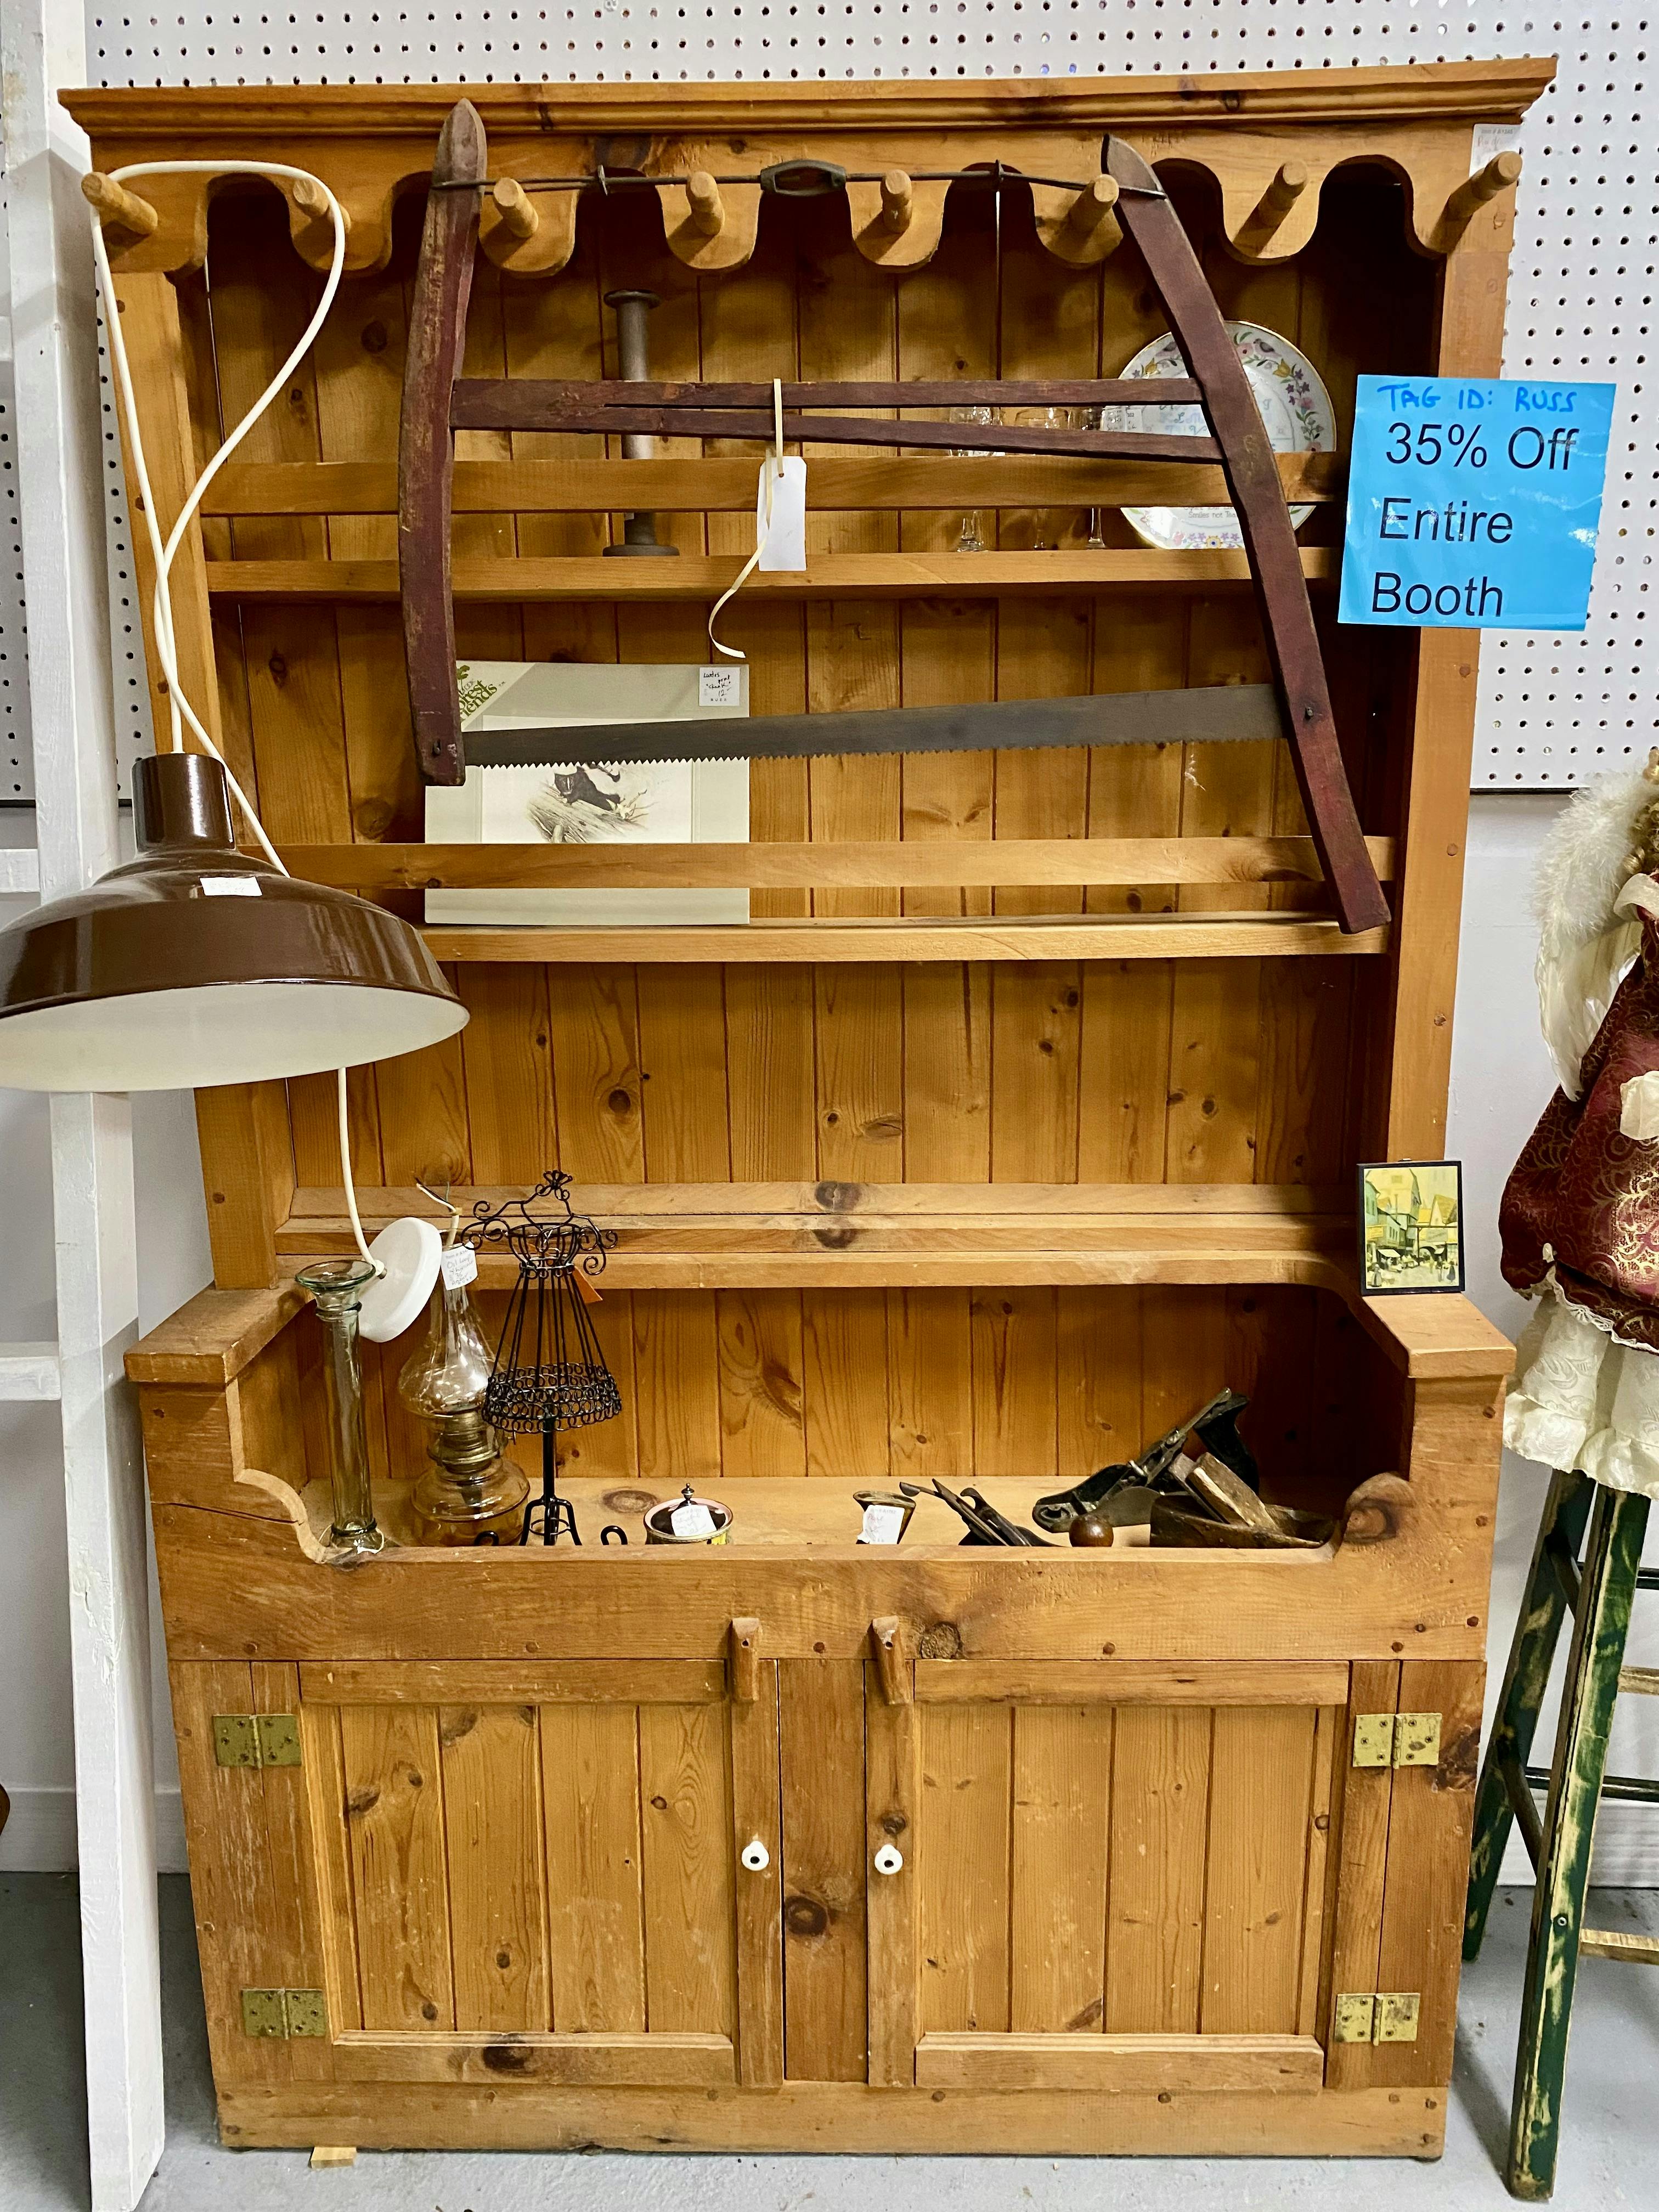 This dry sink is $145 plus 35% off! WOW! Great for a plant shelf, craft display or storage for coats and outerwear in a mud room!